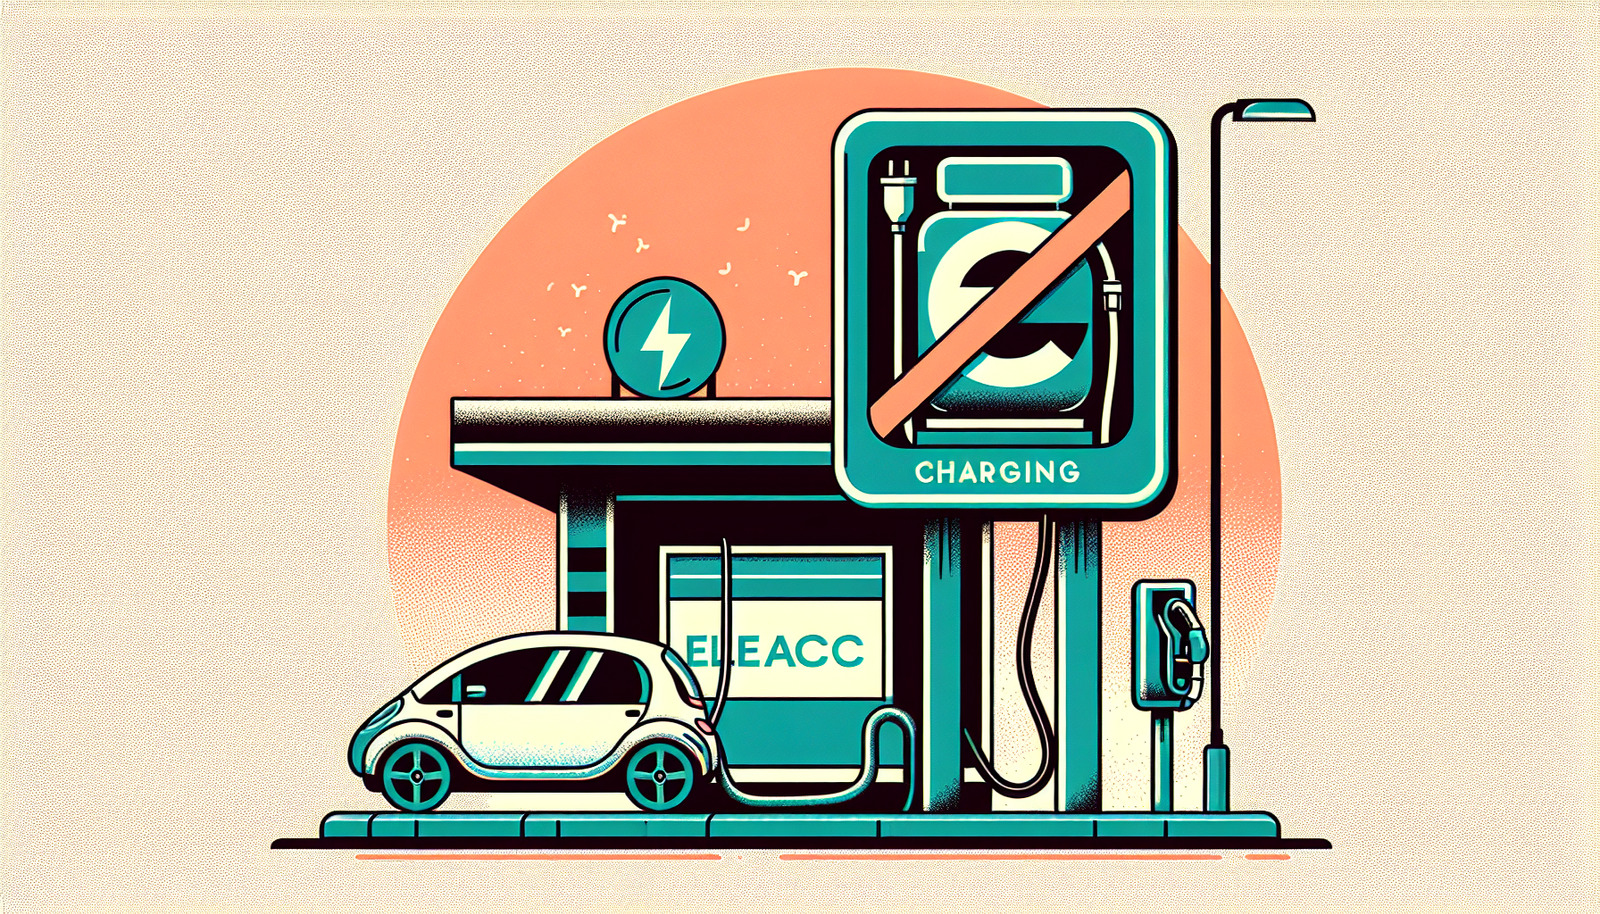 What Are Some Common Misconceptions About Living With An Electric Vehicle?